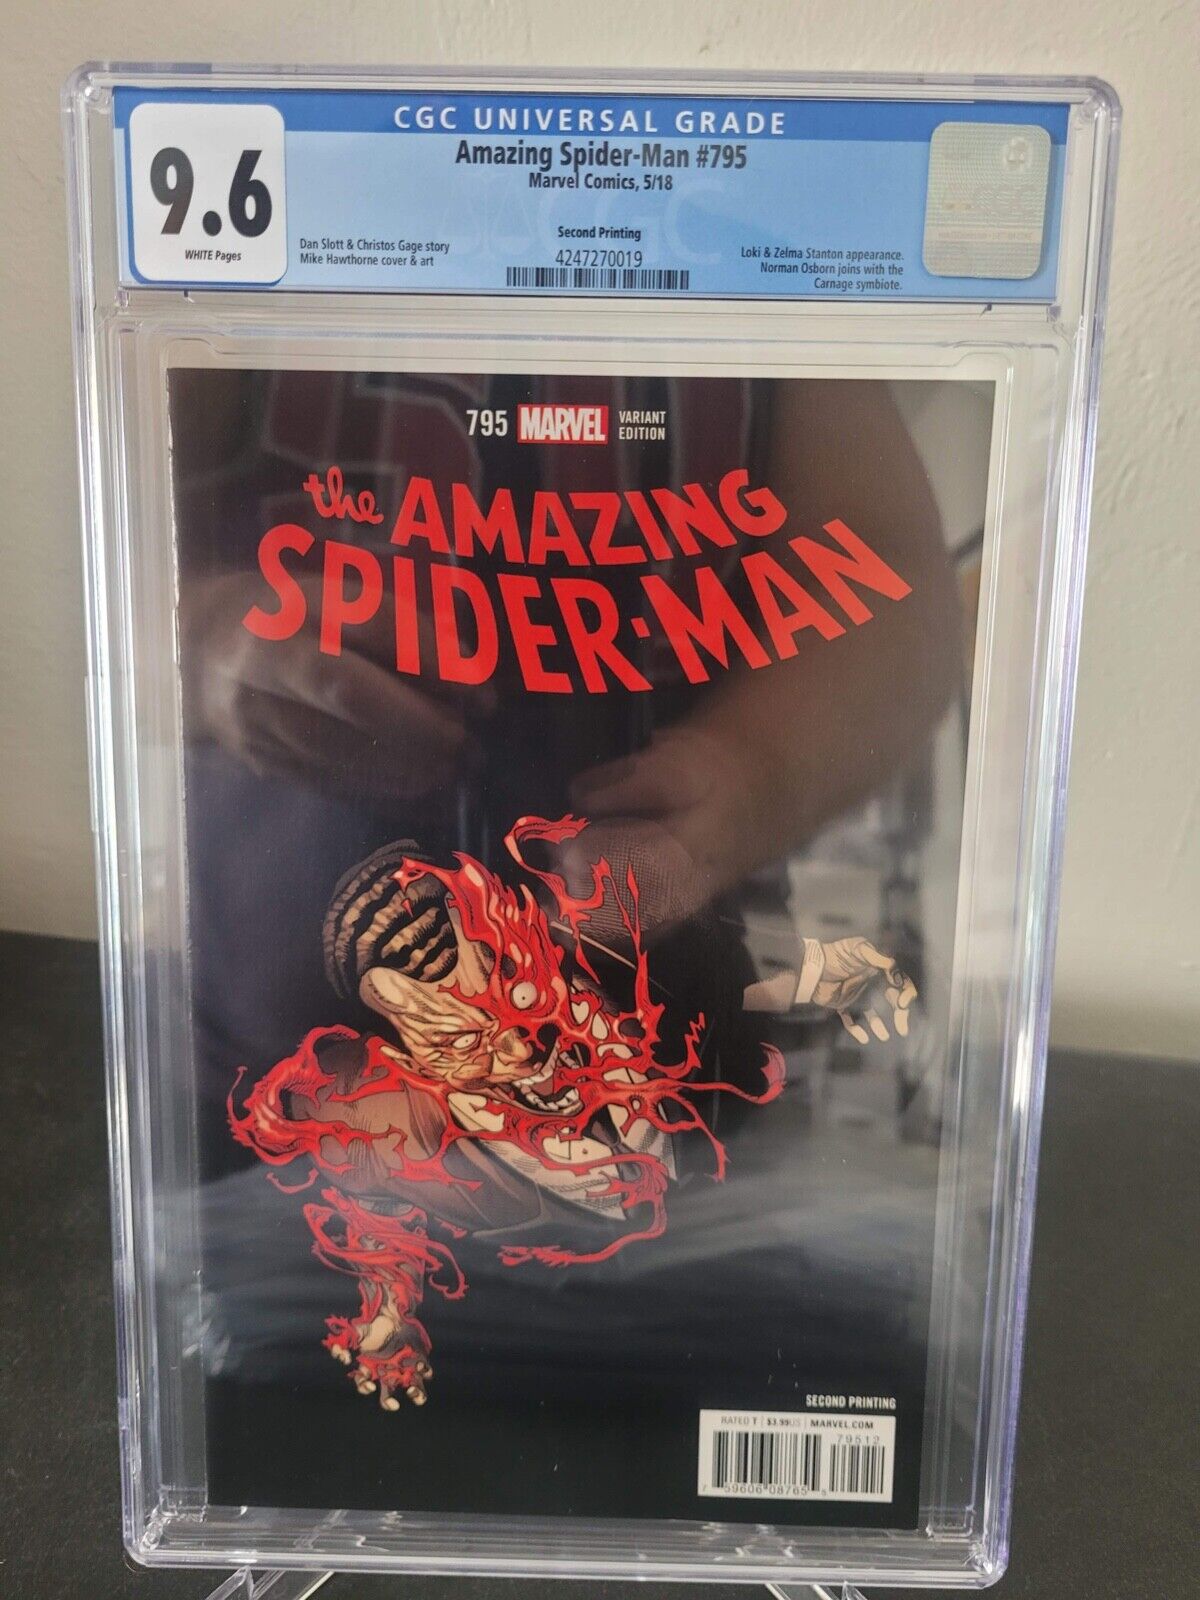 AMAZING SPIDER-MAN #795 CGC 9.6 GRADED MARVEL COMIC RED GOBLIN 2ND PRINT VARIANT